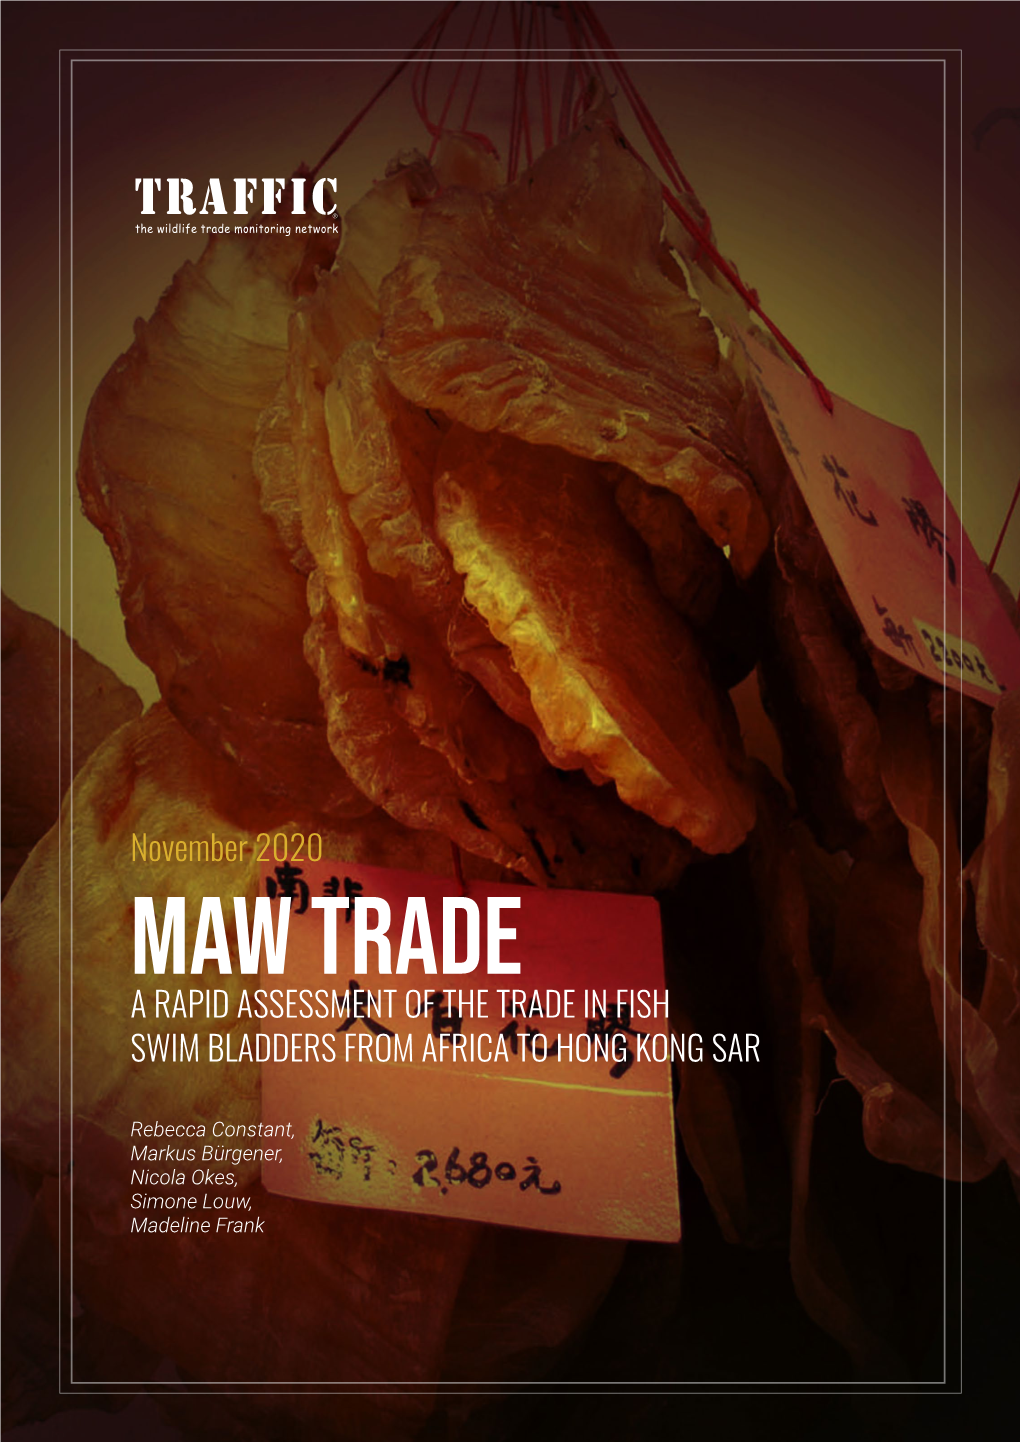 MAW Trade a RAPID ASSESSMENT of the TRADE in FISH SWIM BLADDERS from AFRICA to HONG KONG SAR